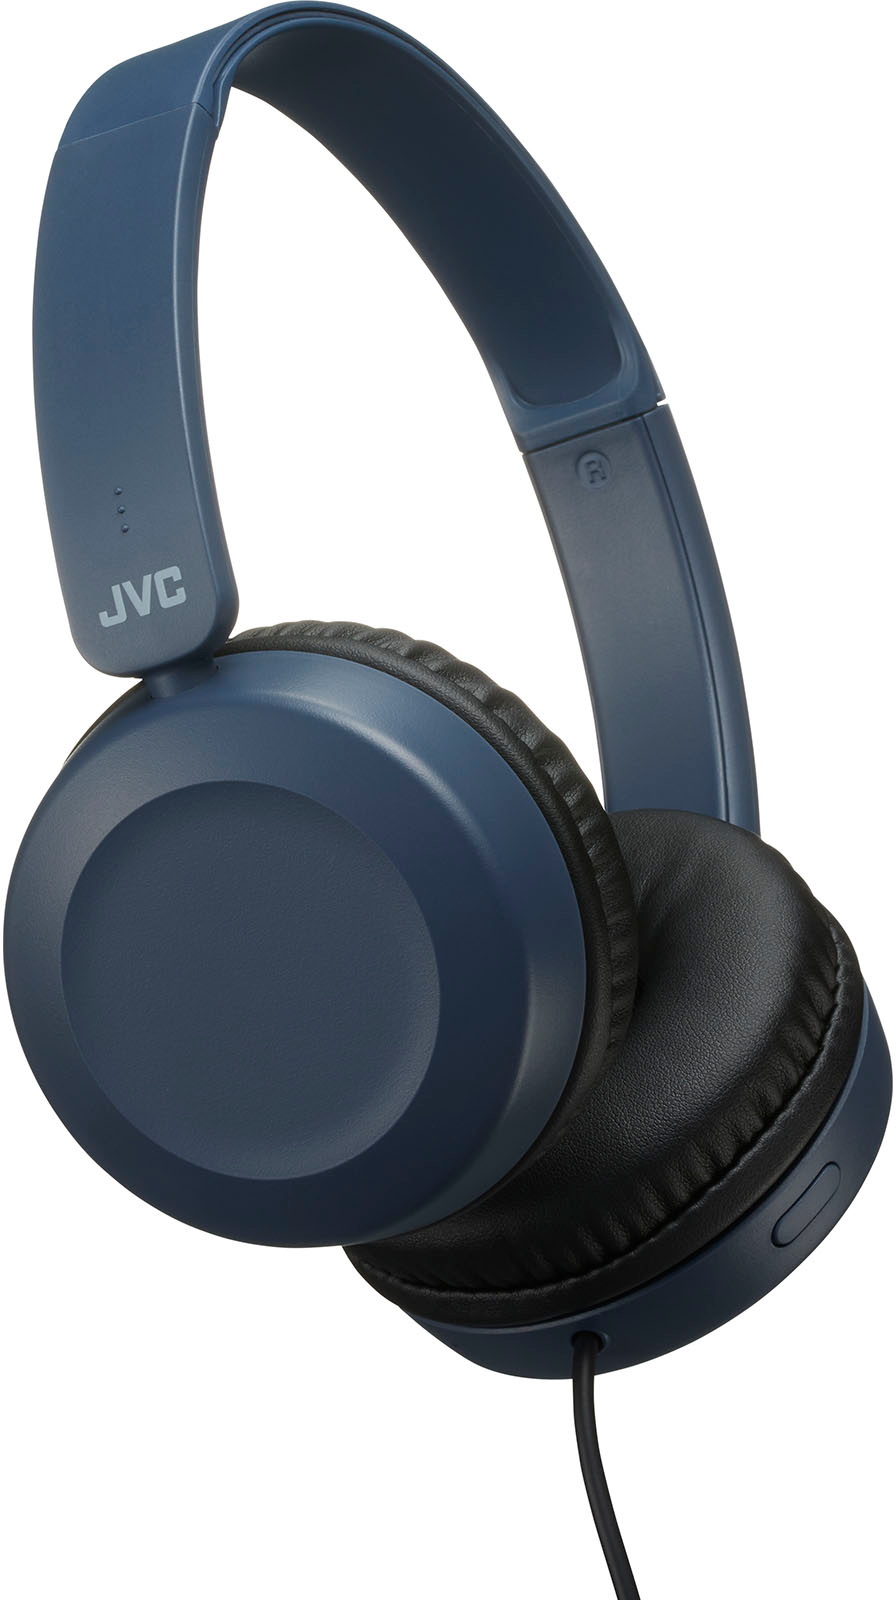 JVC Powerful Sound on Ear Wired Headphones - Blue